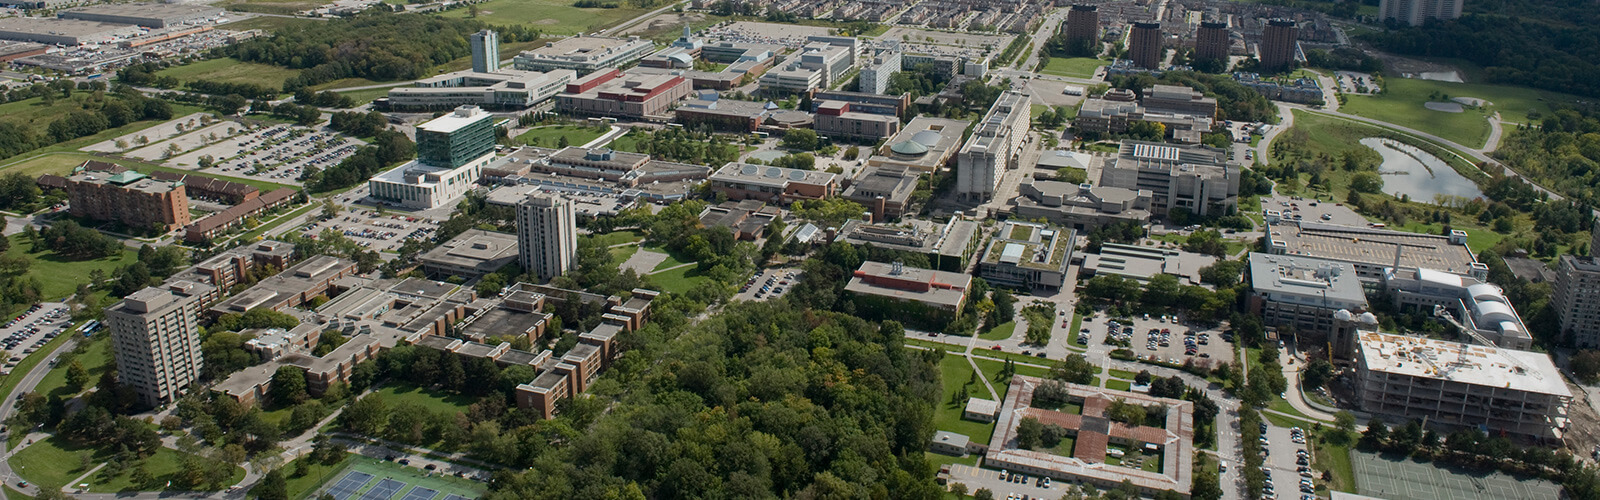 Aerial view of York University and the surrounding residential neighbourhoods.